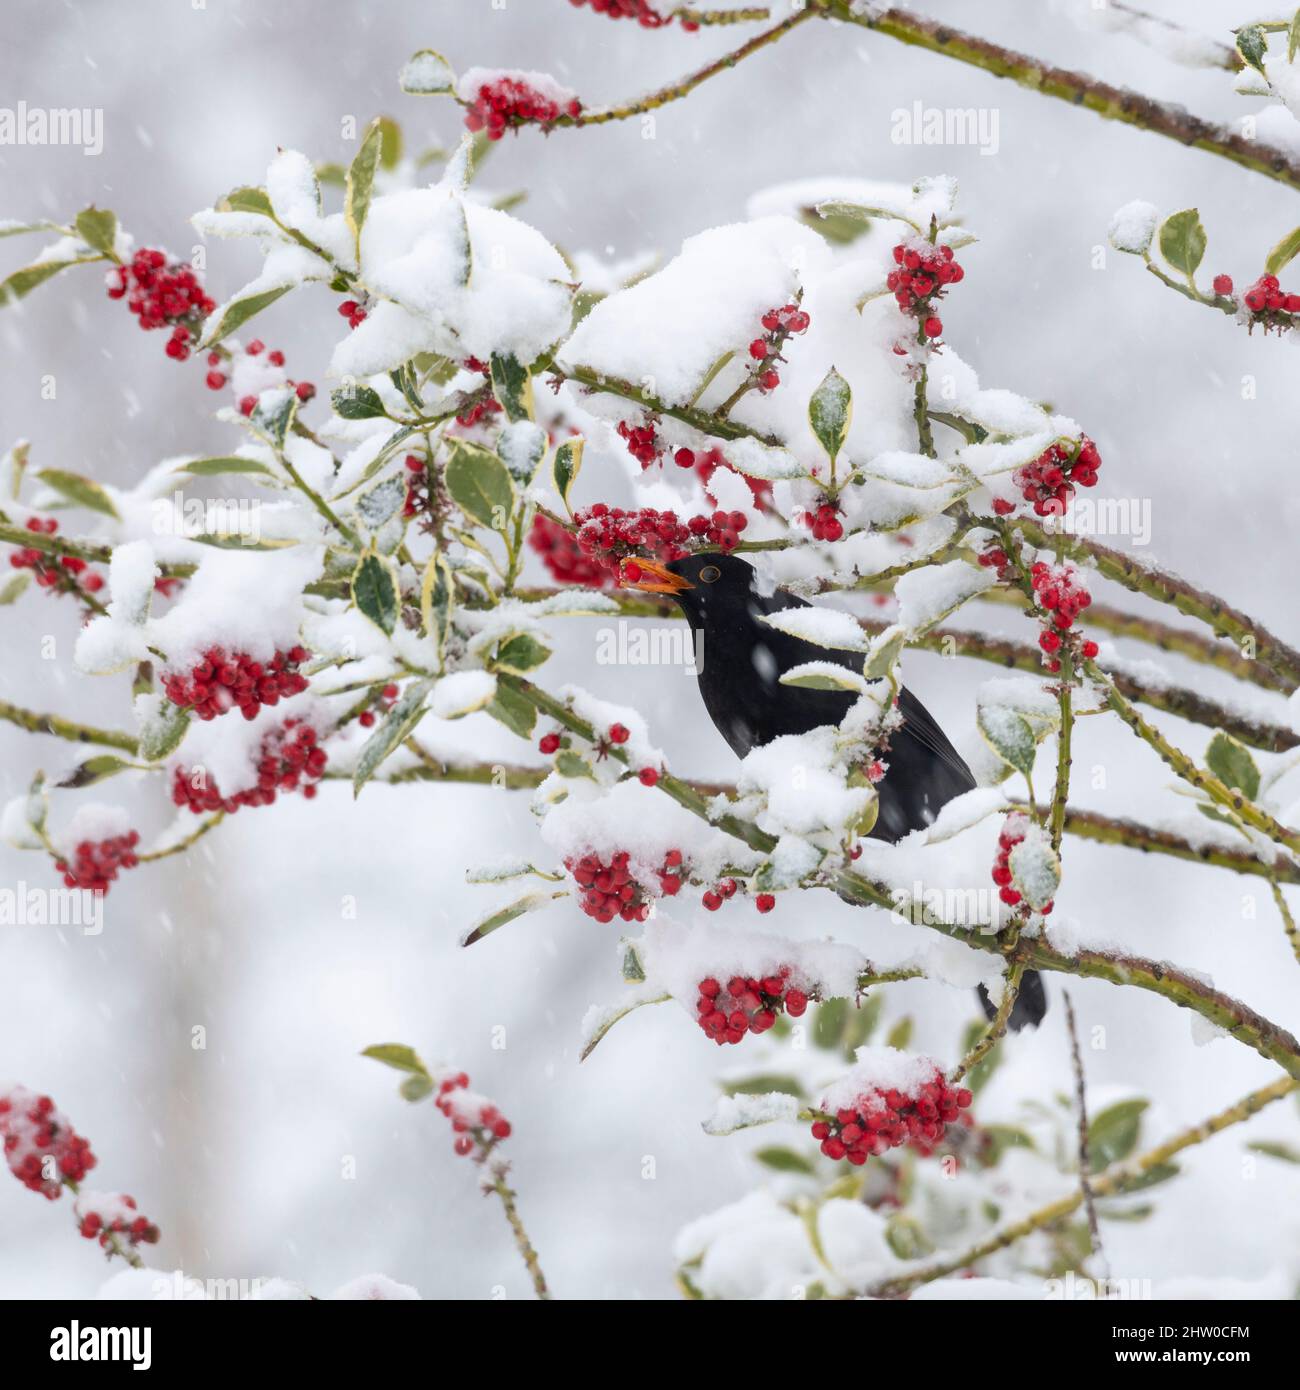 A Male Blackbird (Turdus Merula) Eating a Red Berry From a Holly Bush (Ilex Aquifolium) in Winter During a Snow Storm Stock Photo